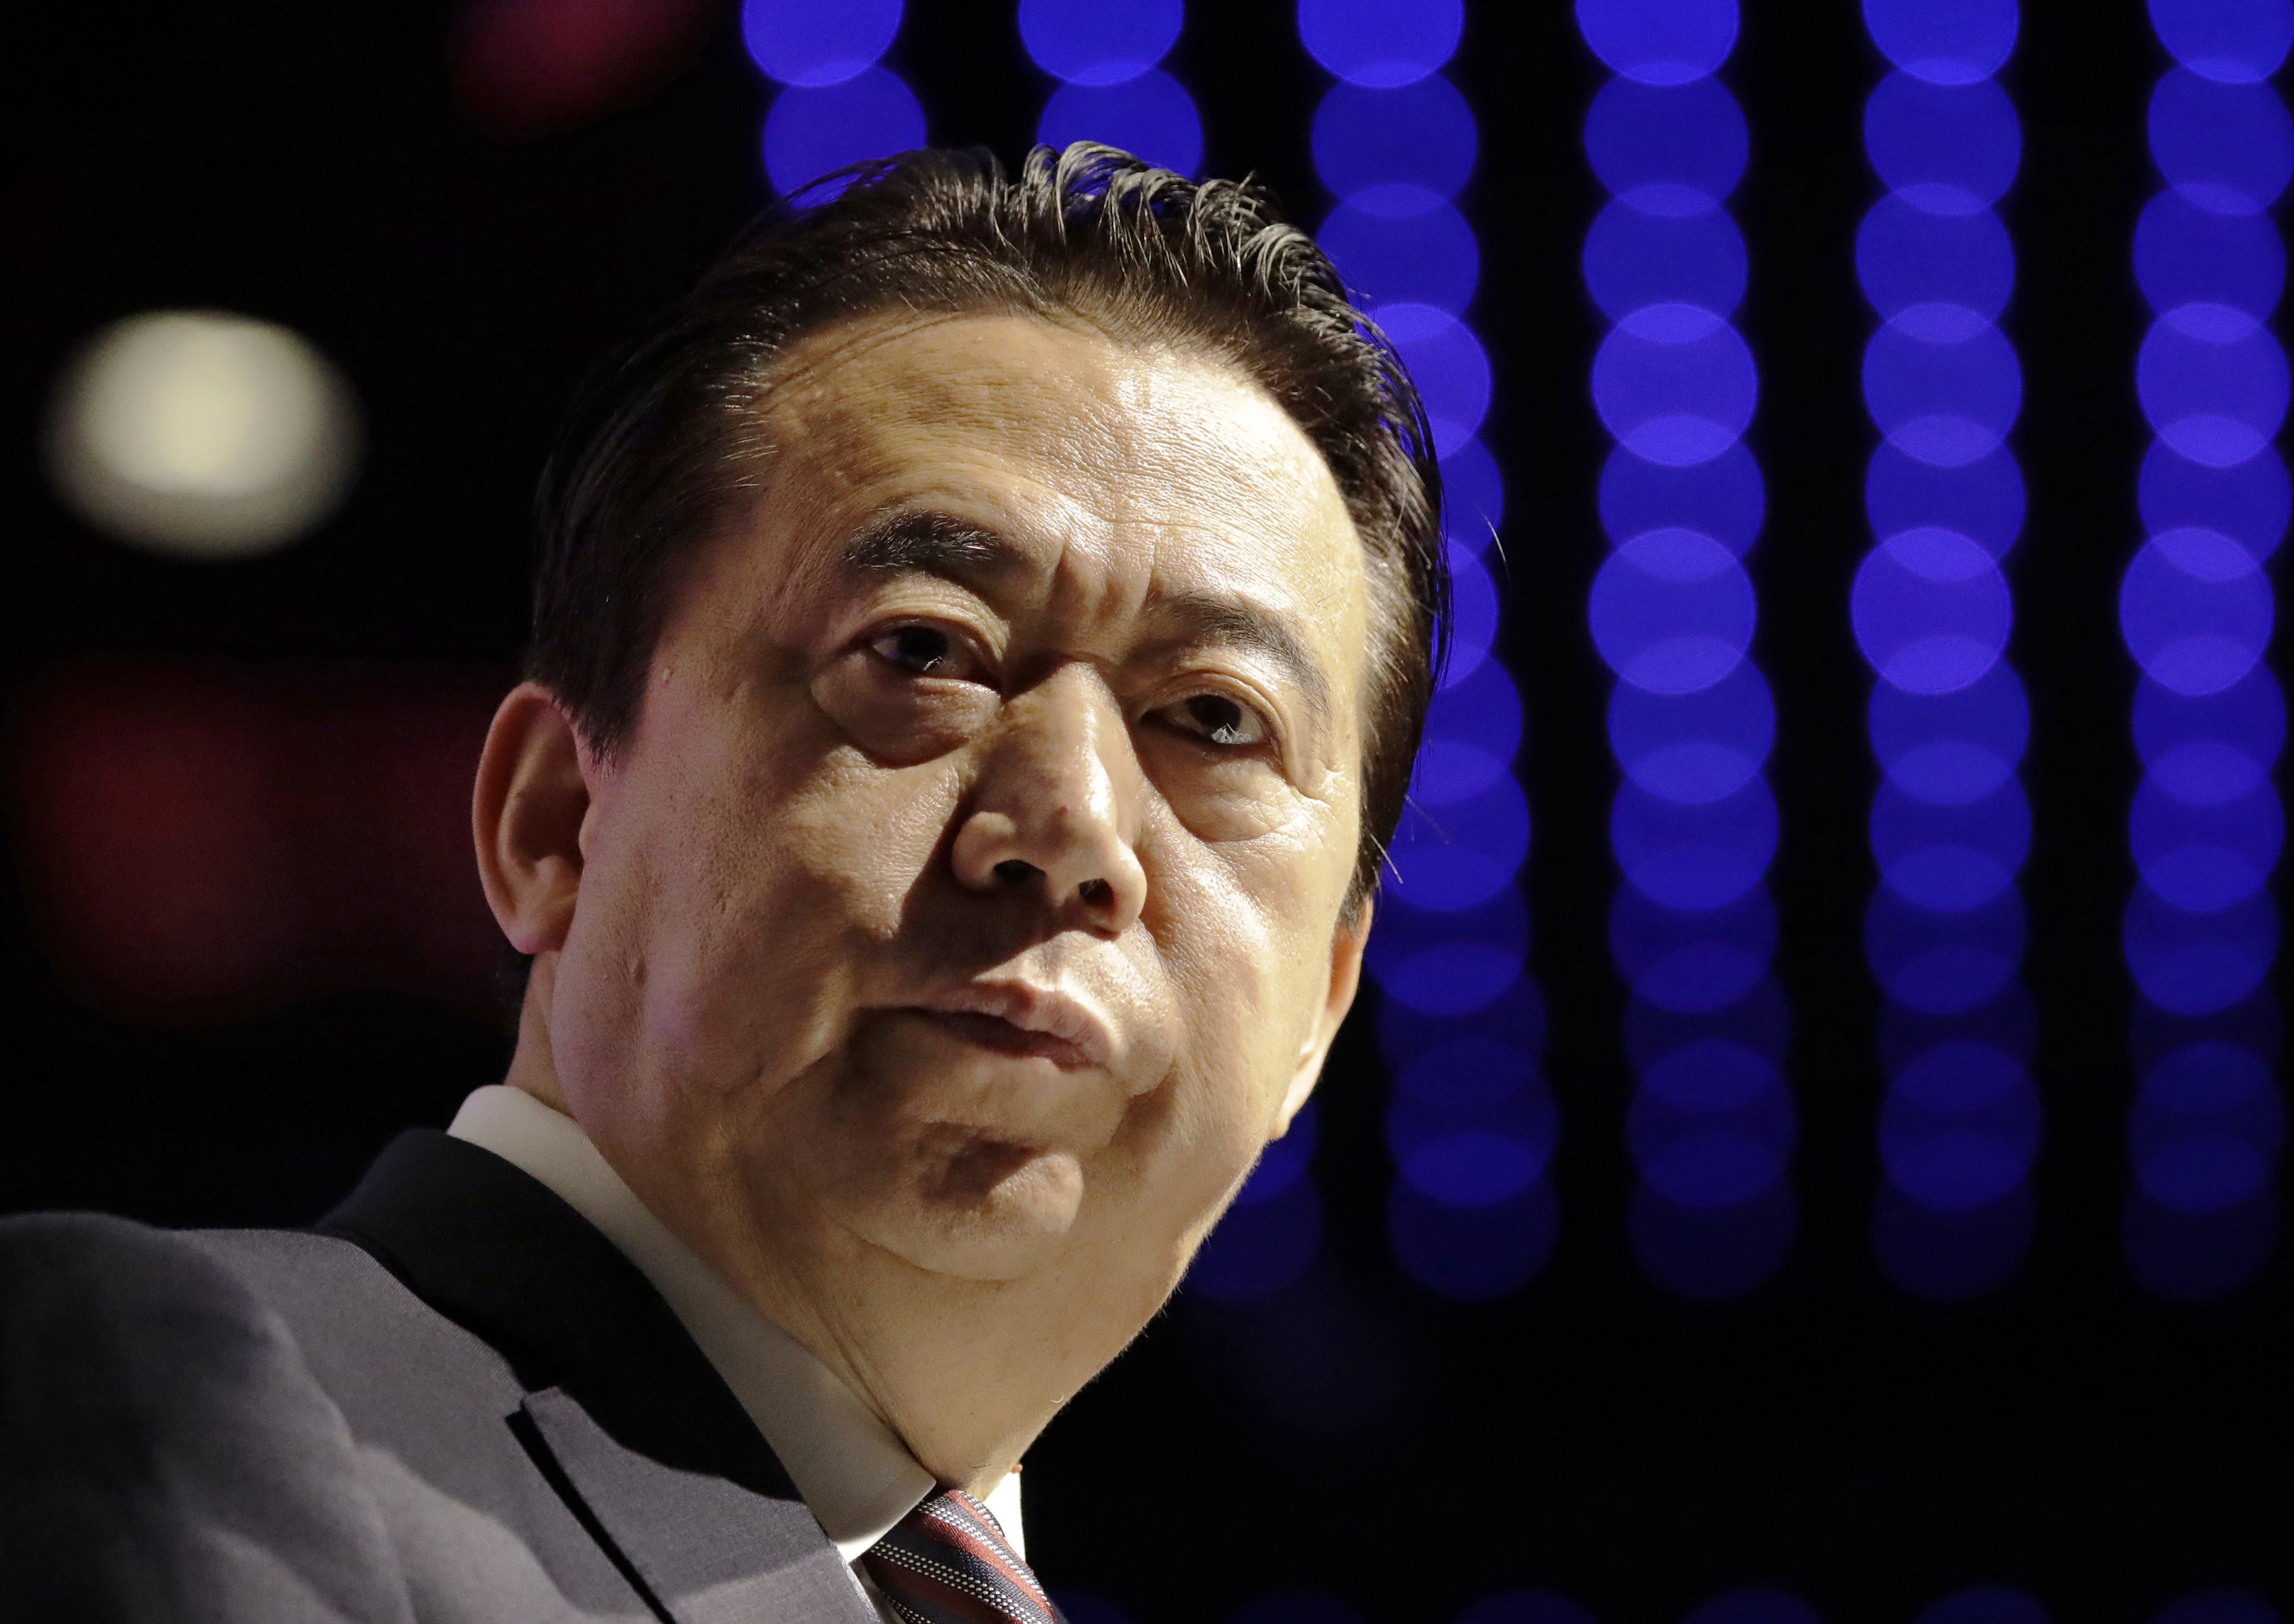 Meng Hongwei disappeared on a visit to China last year. Photo: AP